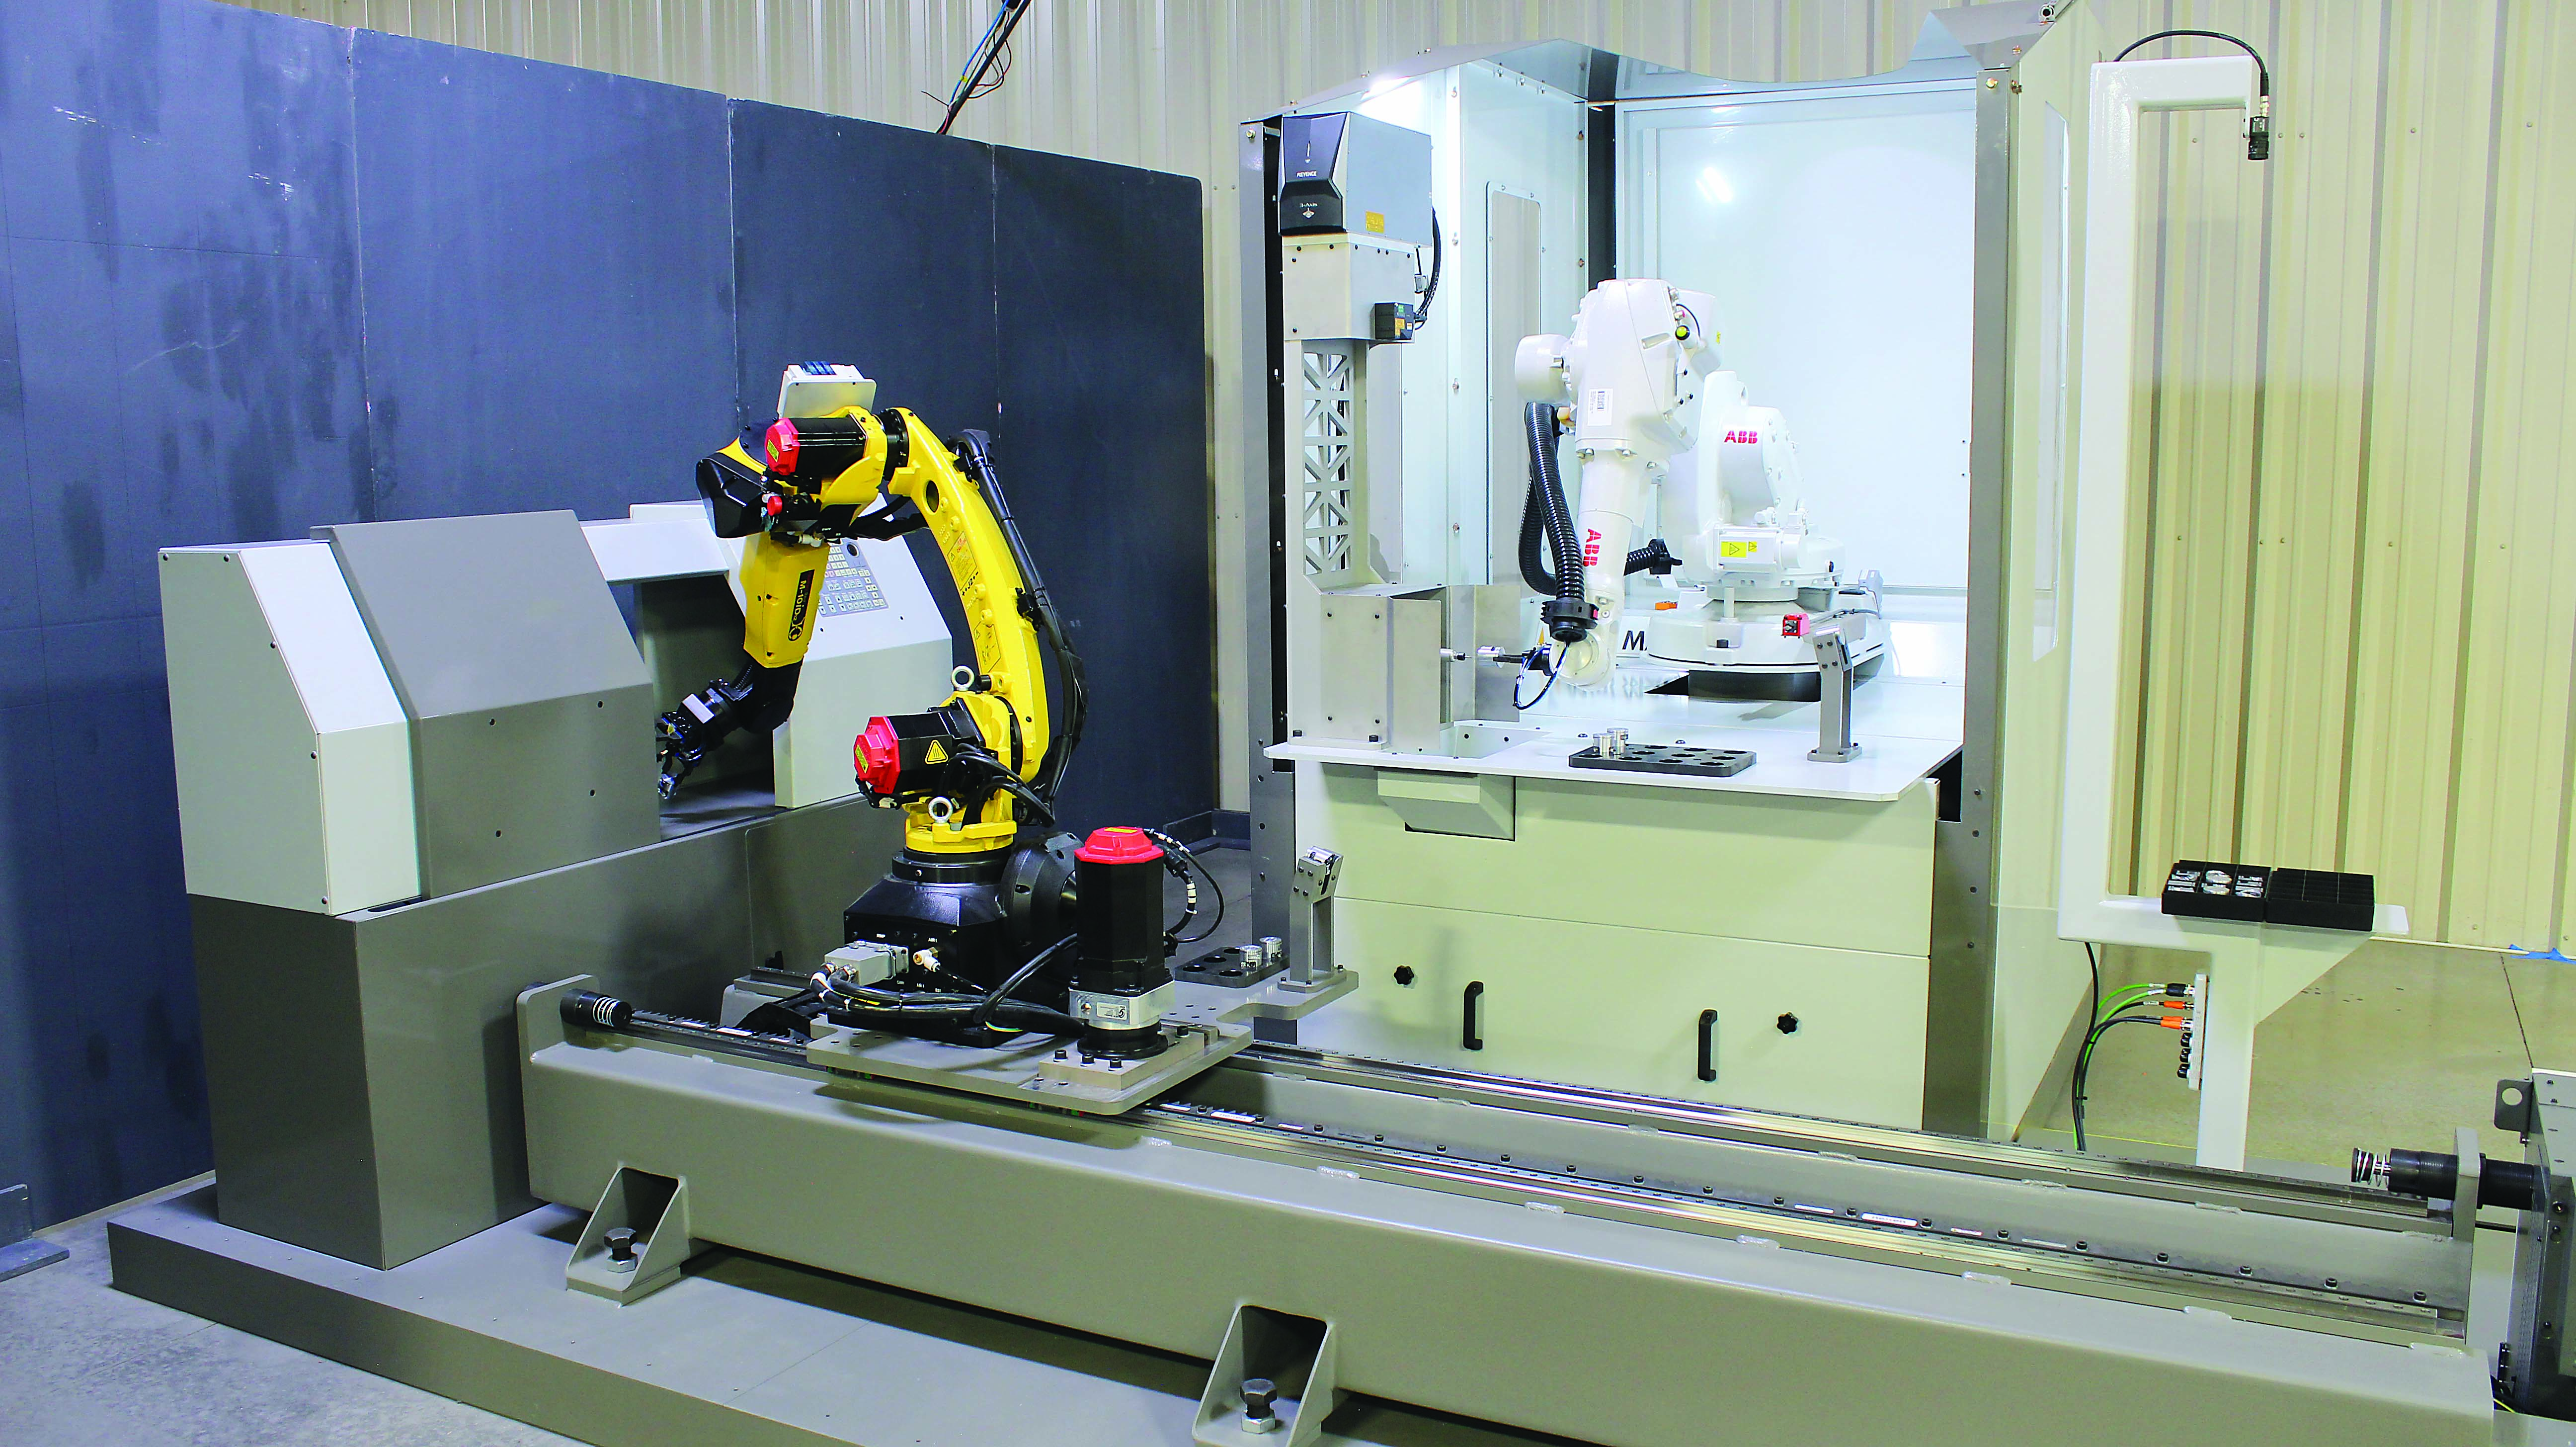 This cell includes a CNC machine, two robot arms, an ATI Industrial Automation deburring tool and a gripper tool.